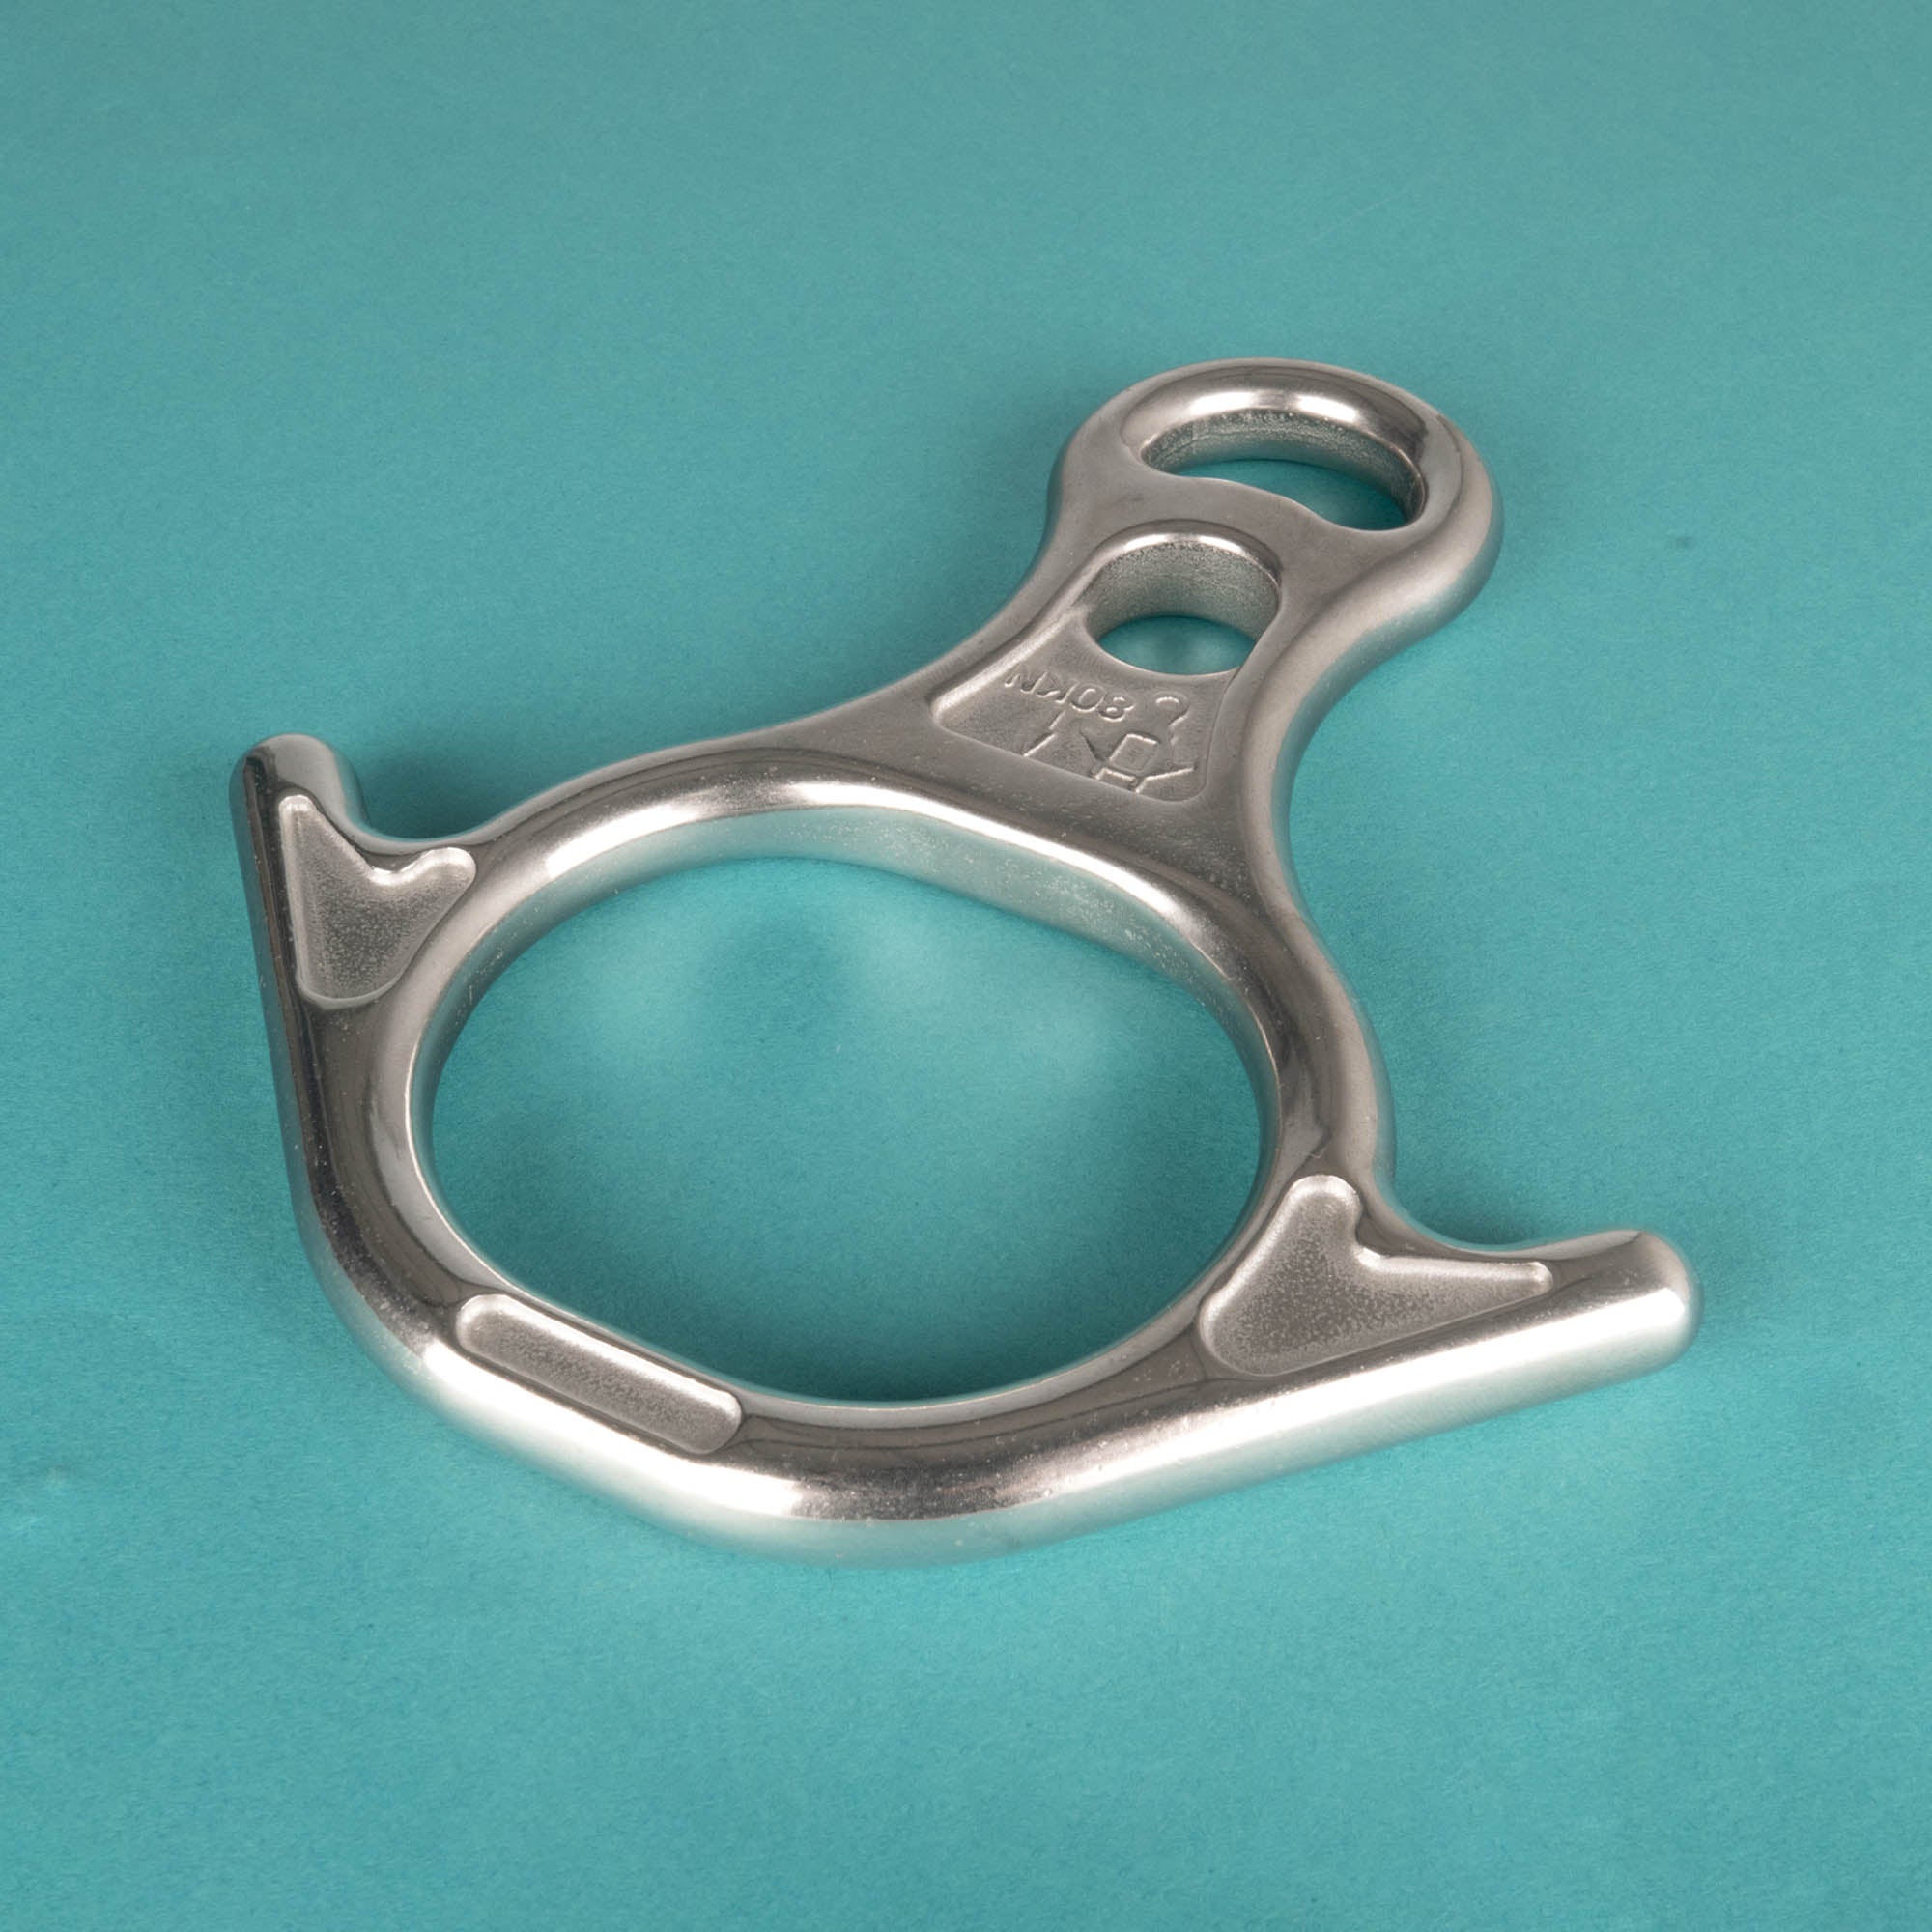 ISC steel figure of 8 on a light blue background